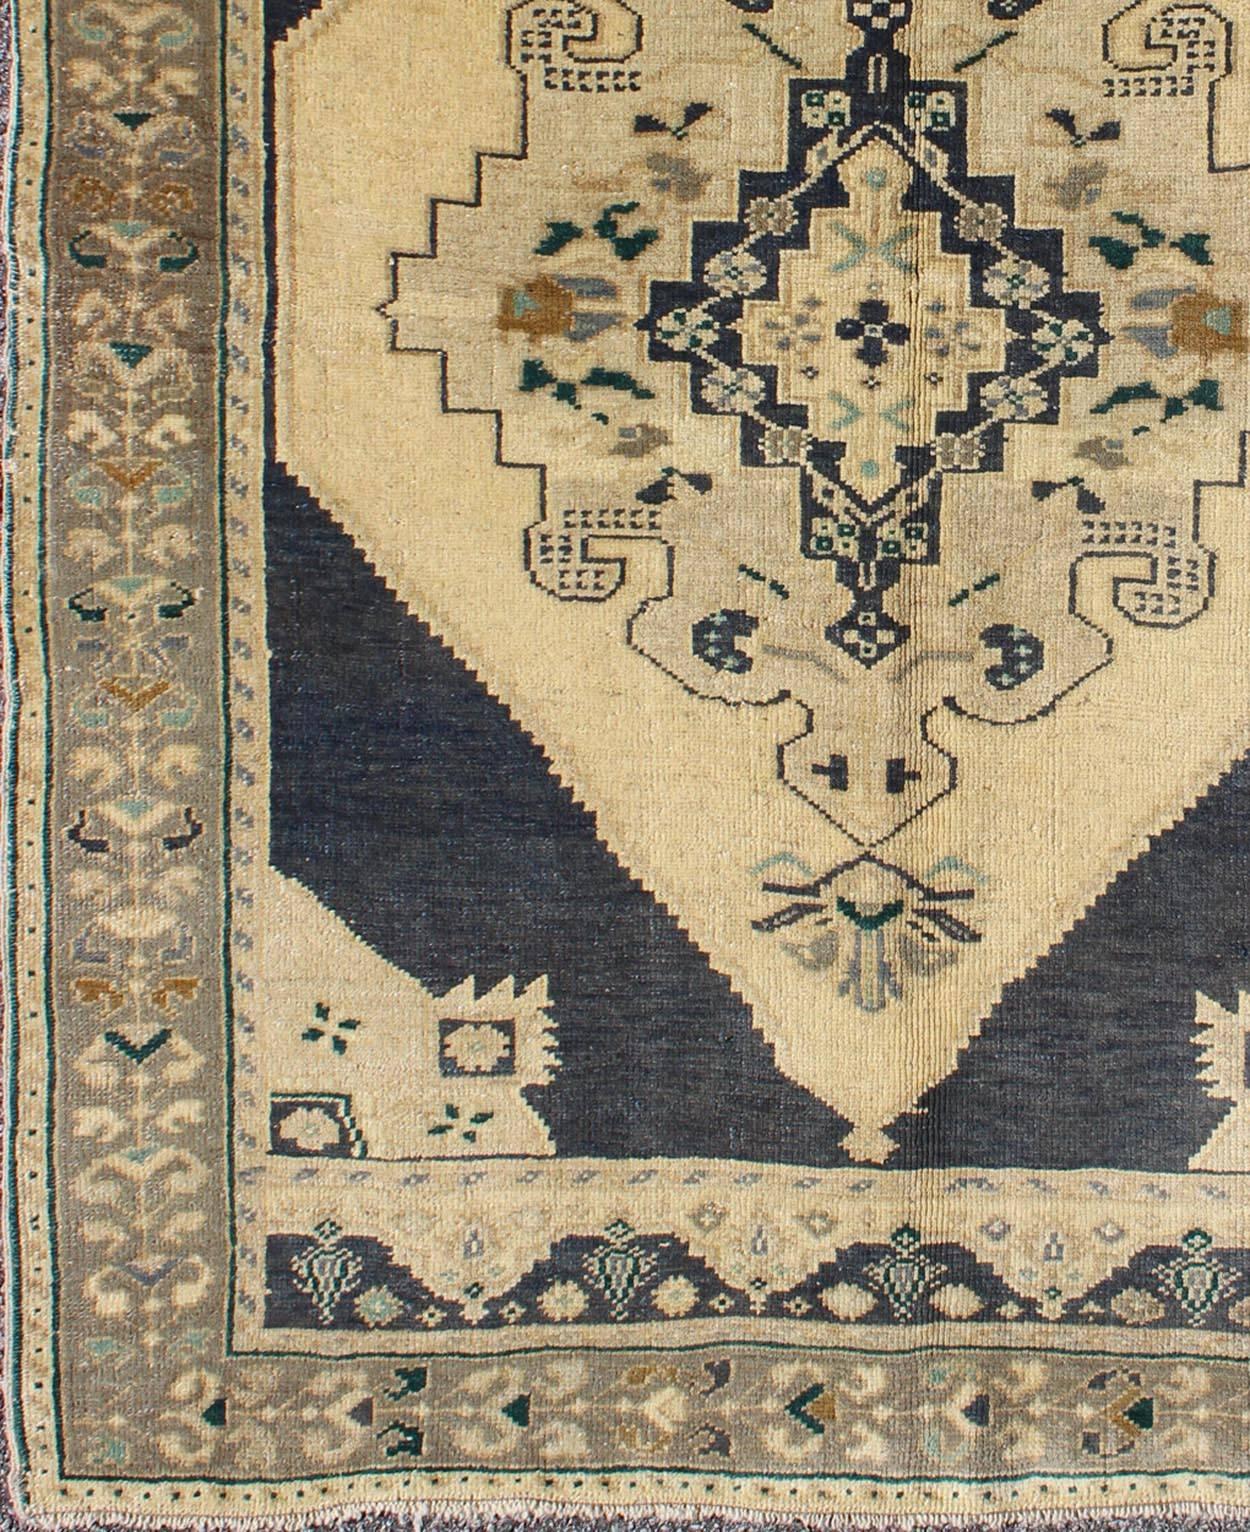 Vintage Turkish Oushak rug with stylized medallion in midnight blue and cream, rug en-112153, country of origin / type: Turkey / Oushak, circa 1940

This Turkish vintage Oushak rug, circa 1940 features an intricately beautiful and highly stylized